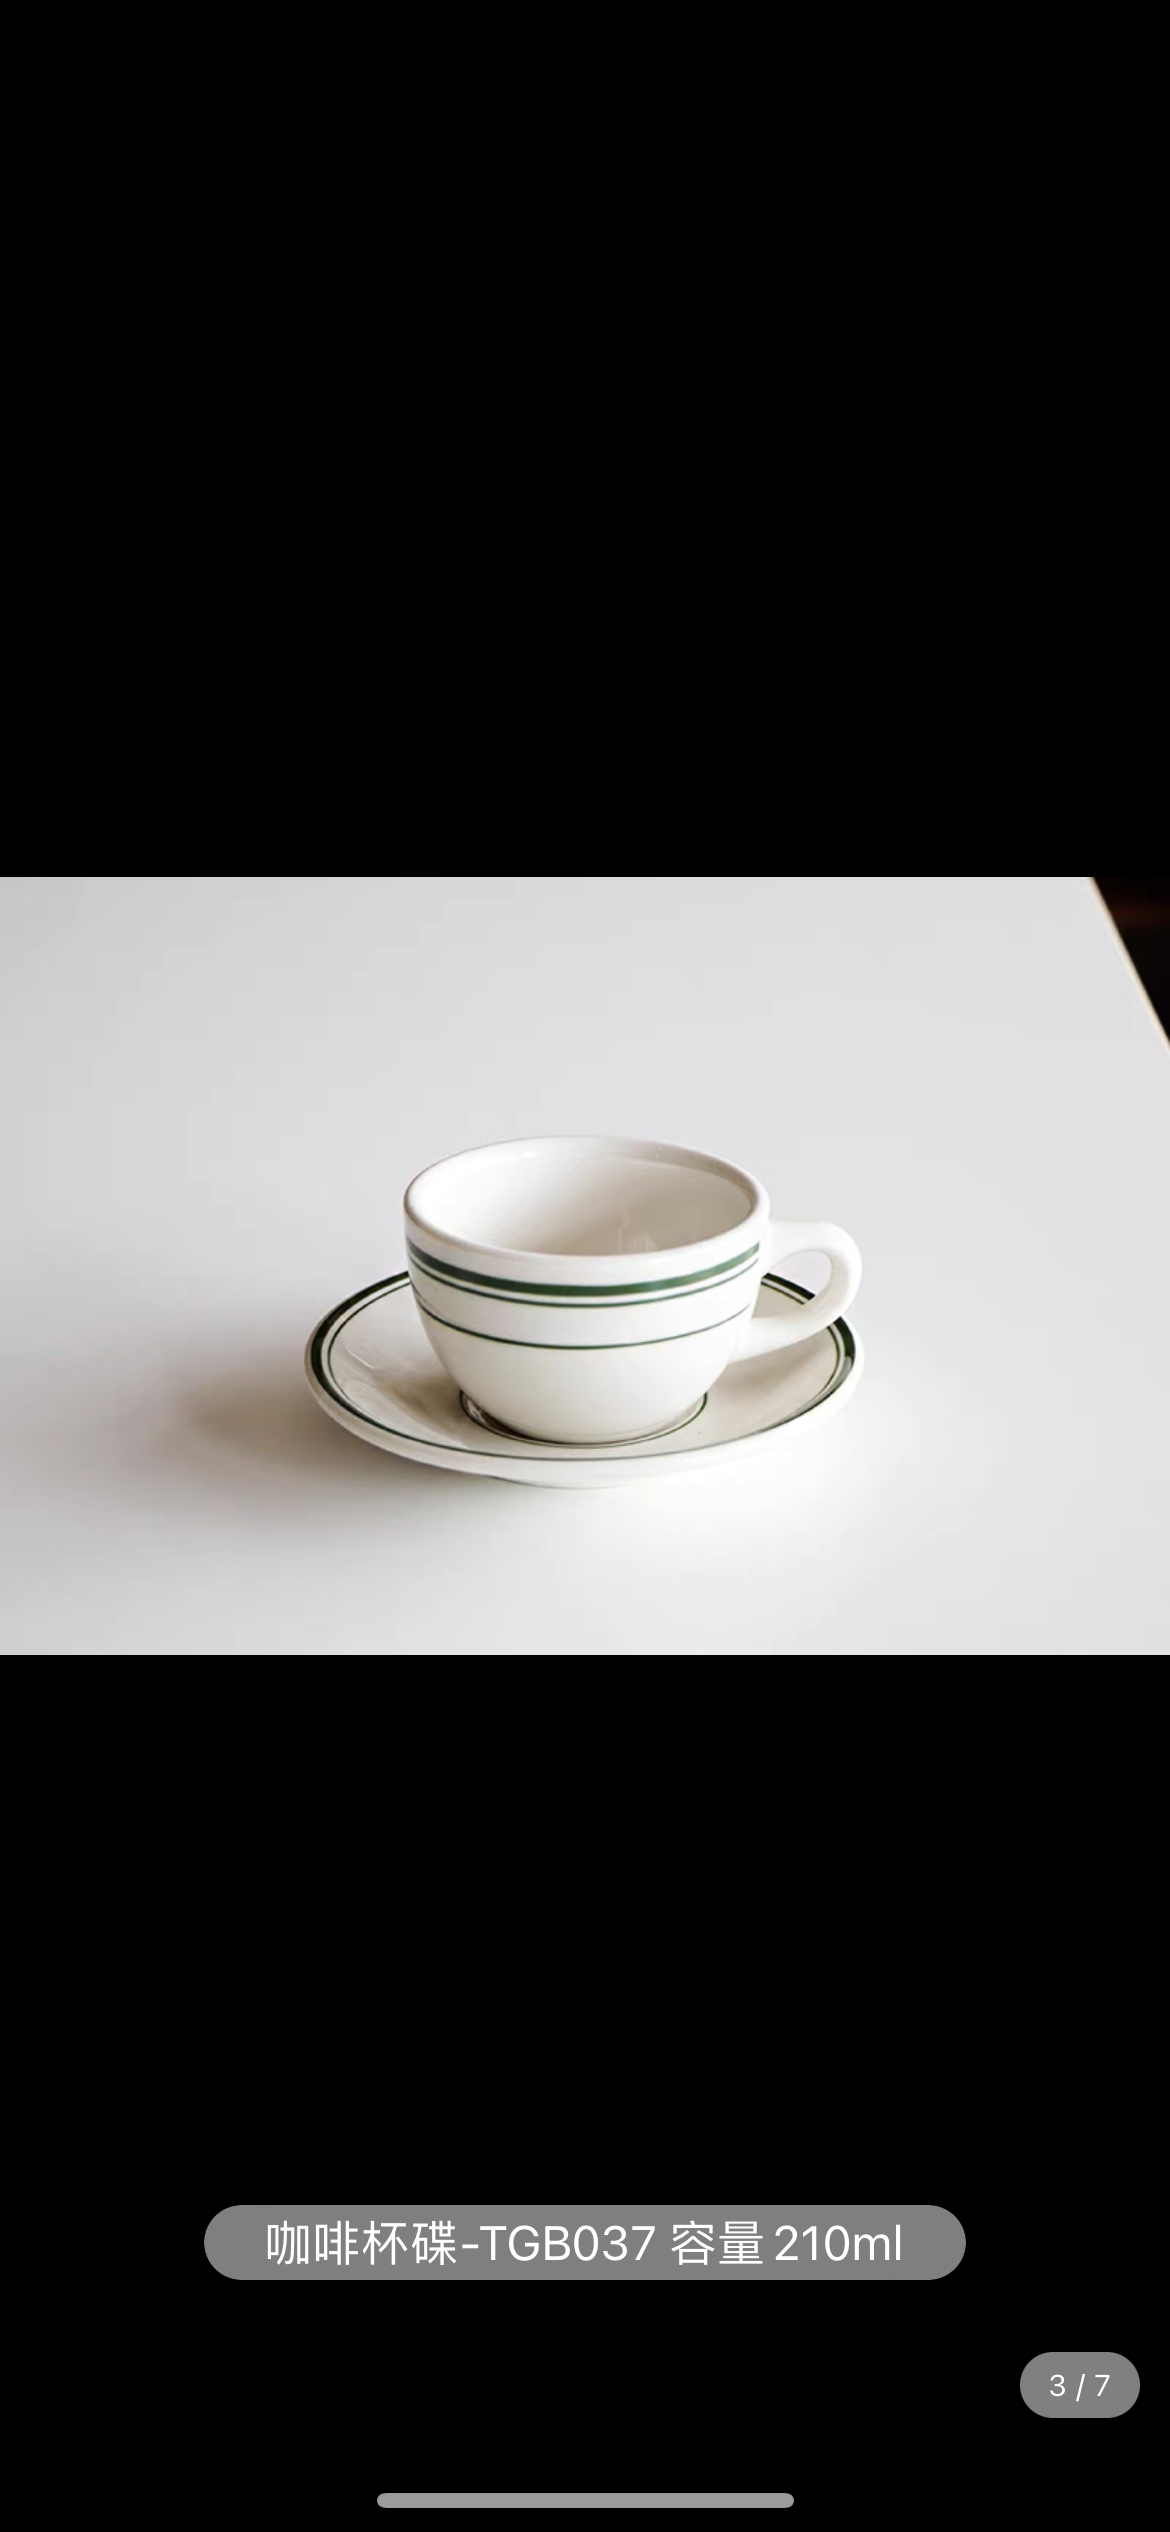 Classic vitrified diner coffee set